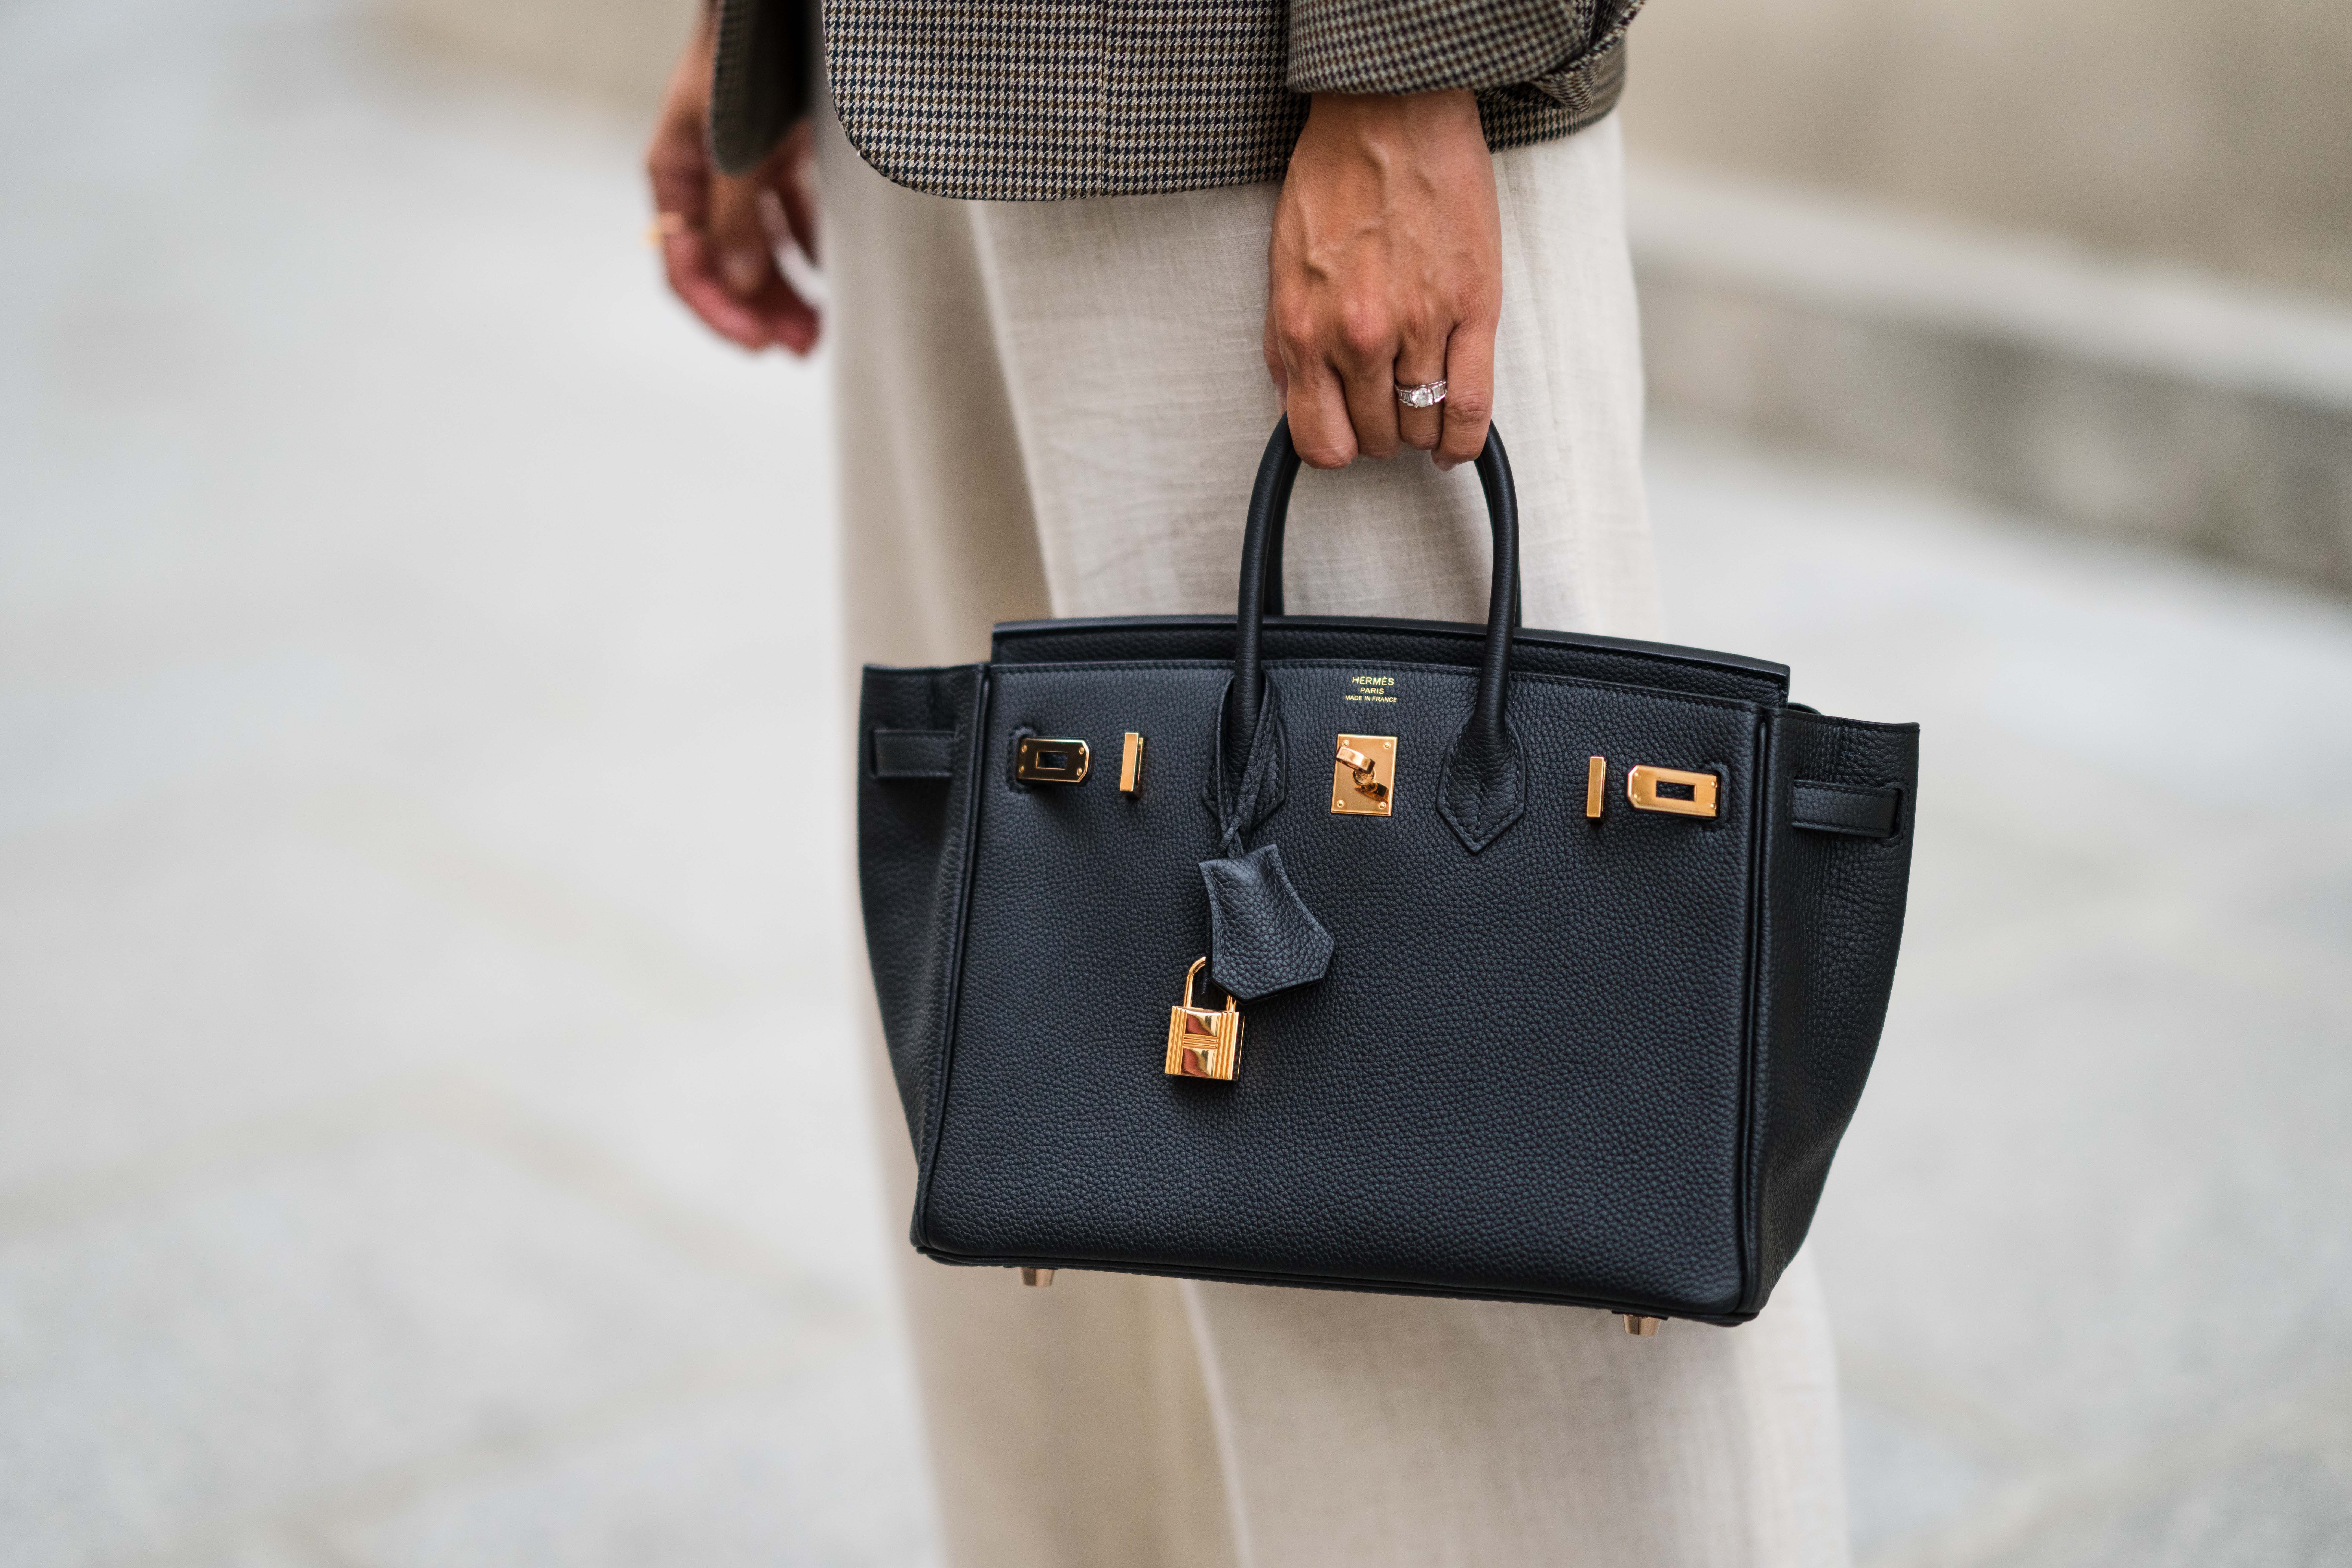 Top 5 Things to Consider When Valuing an Birkin Bag or Hermès Kelly Bag |  Handbags & Accessories | Sotheby's